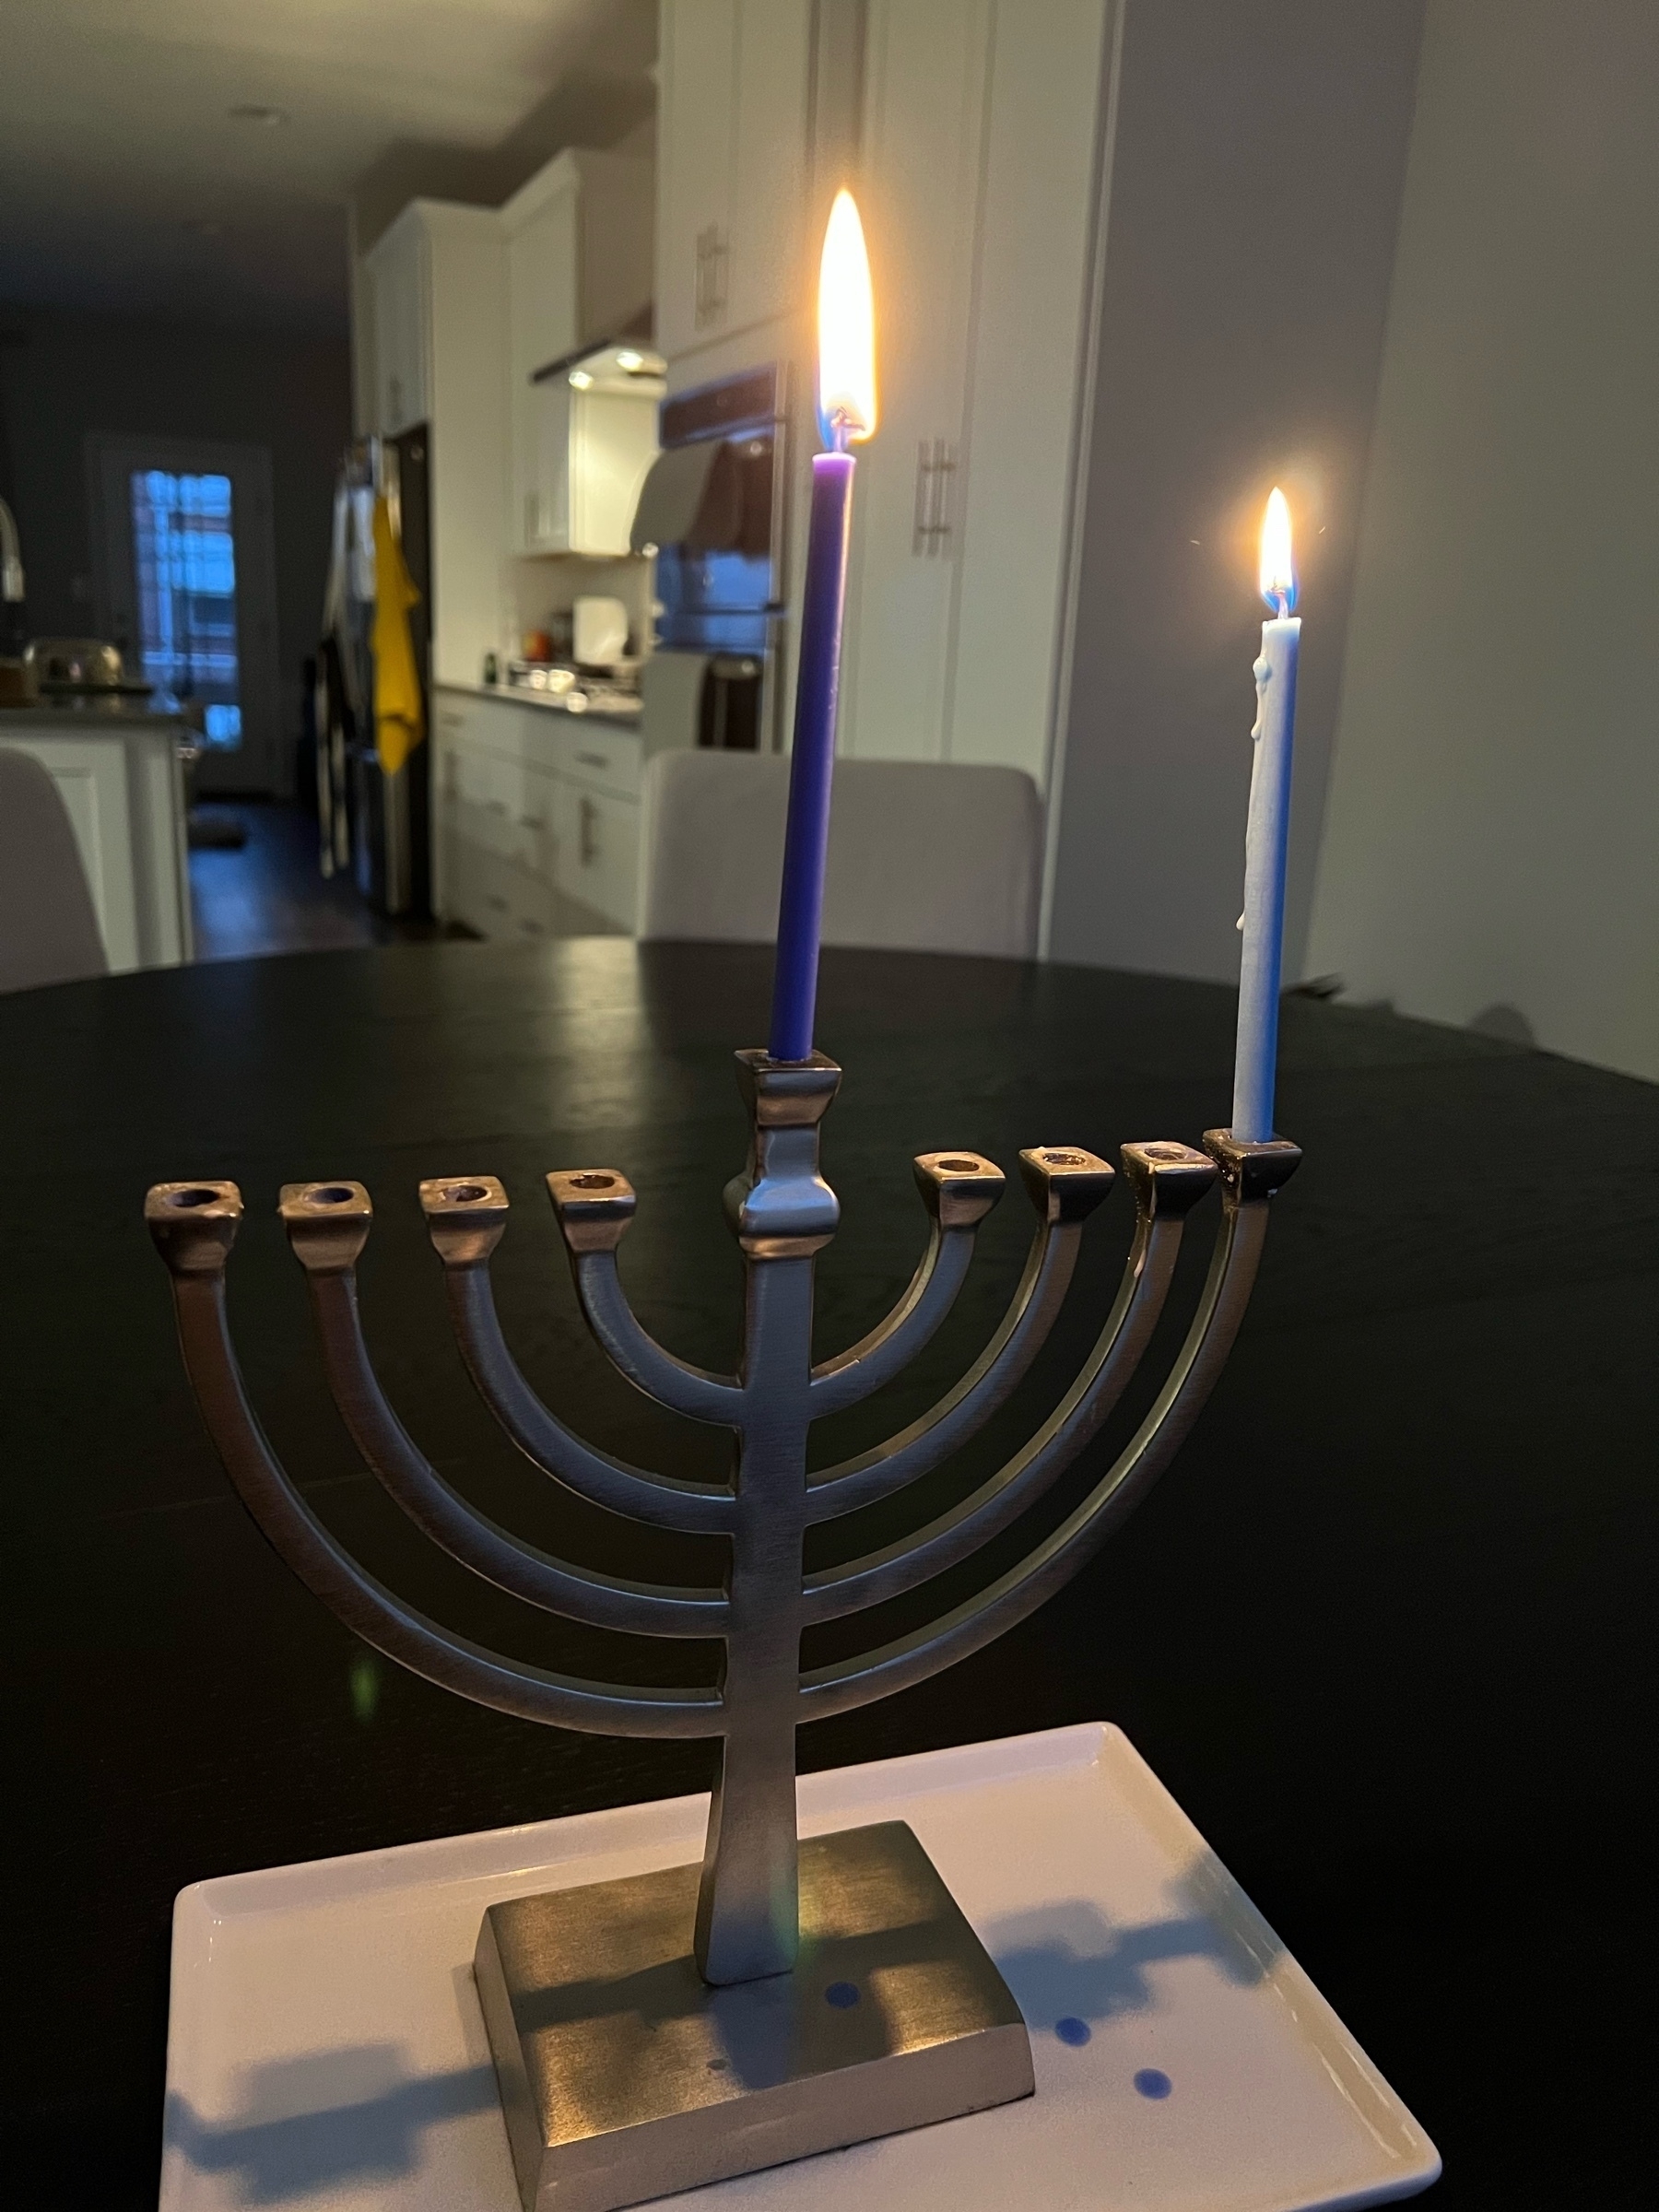 First night of Hanukkah, silver menorah with lit candles.